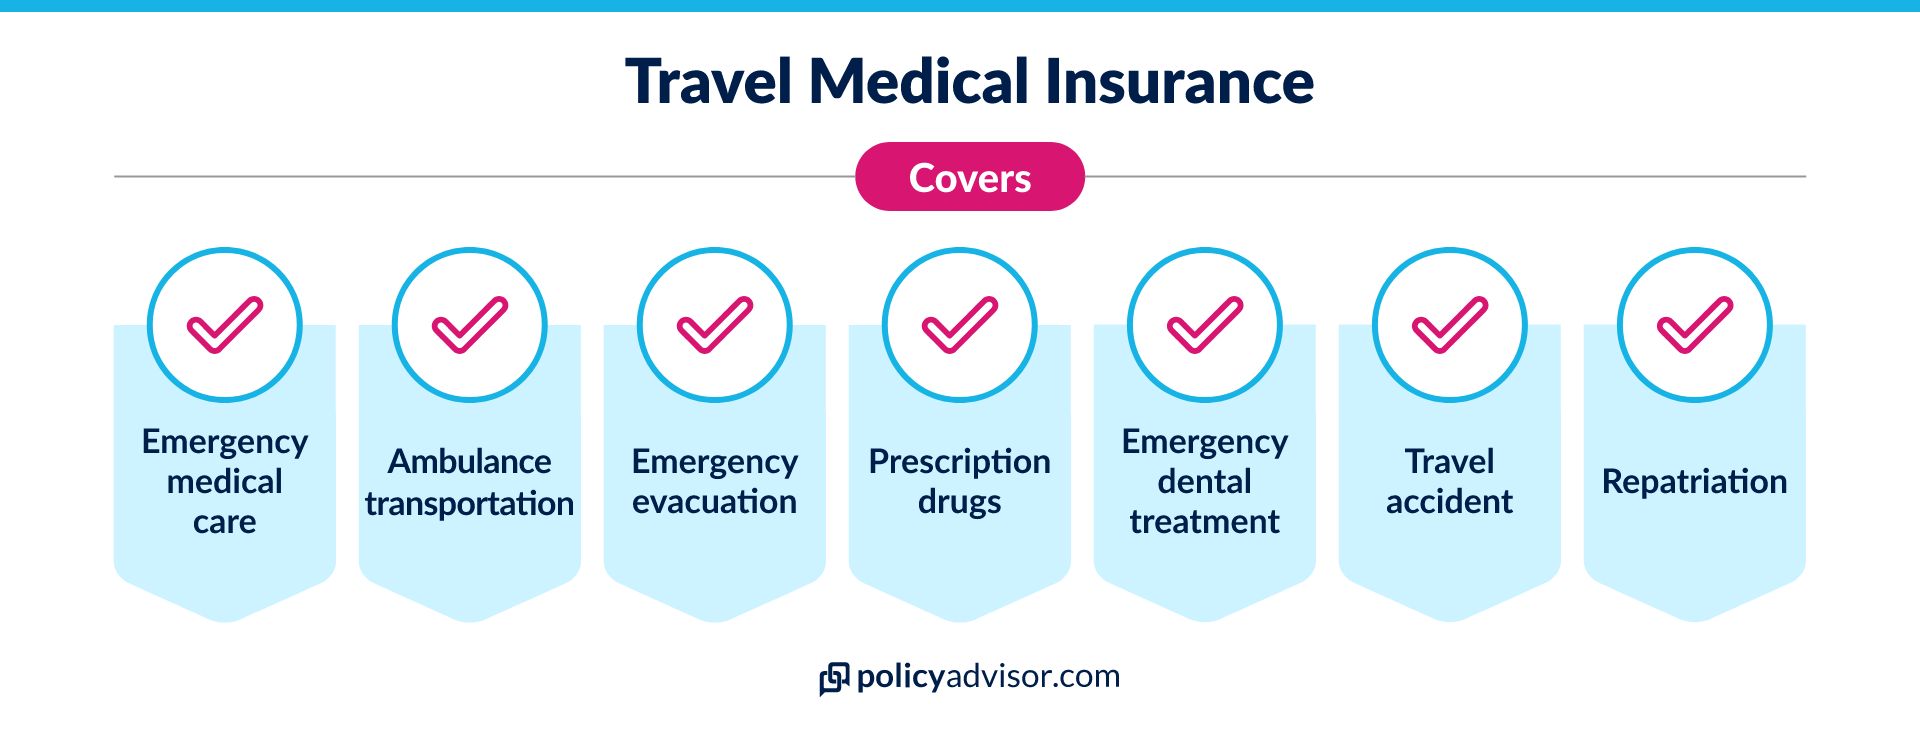 Travel medical insurance can cover emergency health care costs while you are travelling.